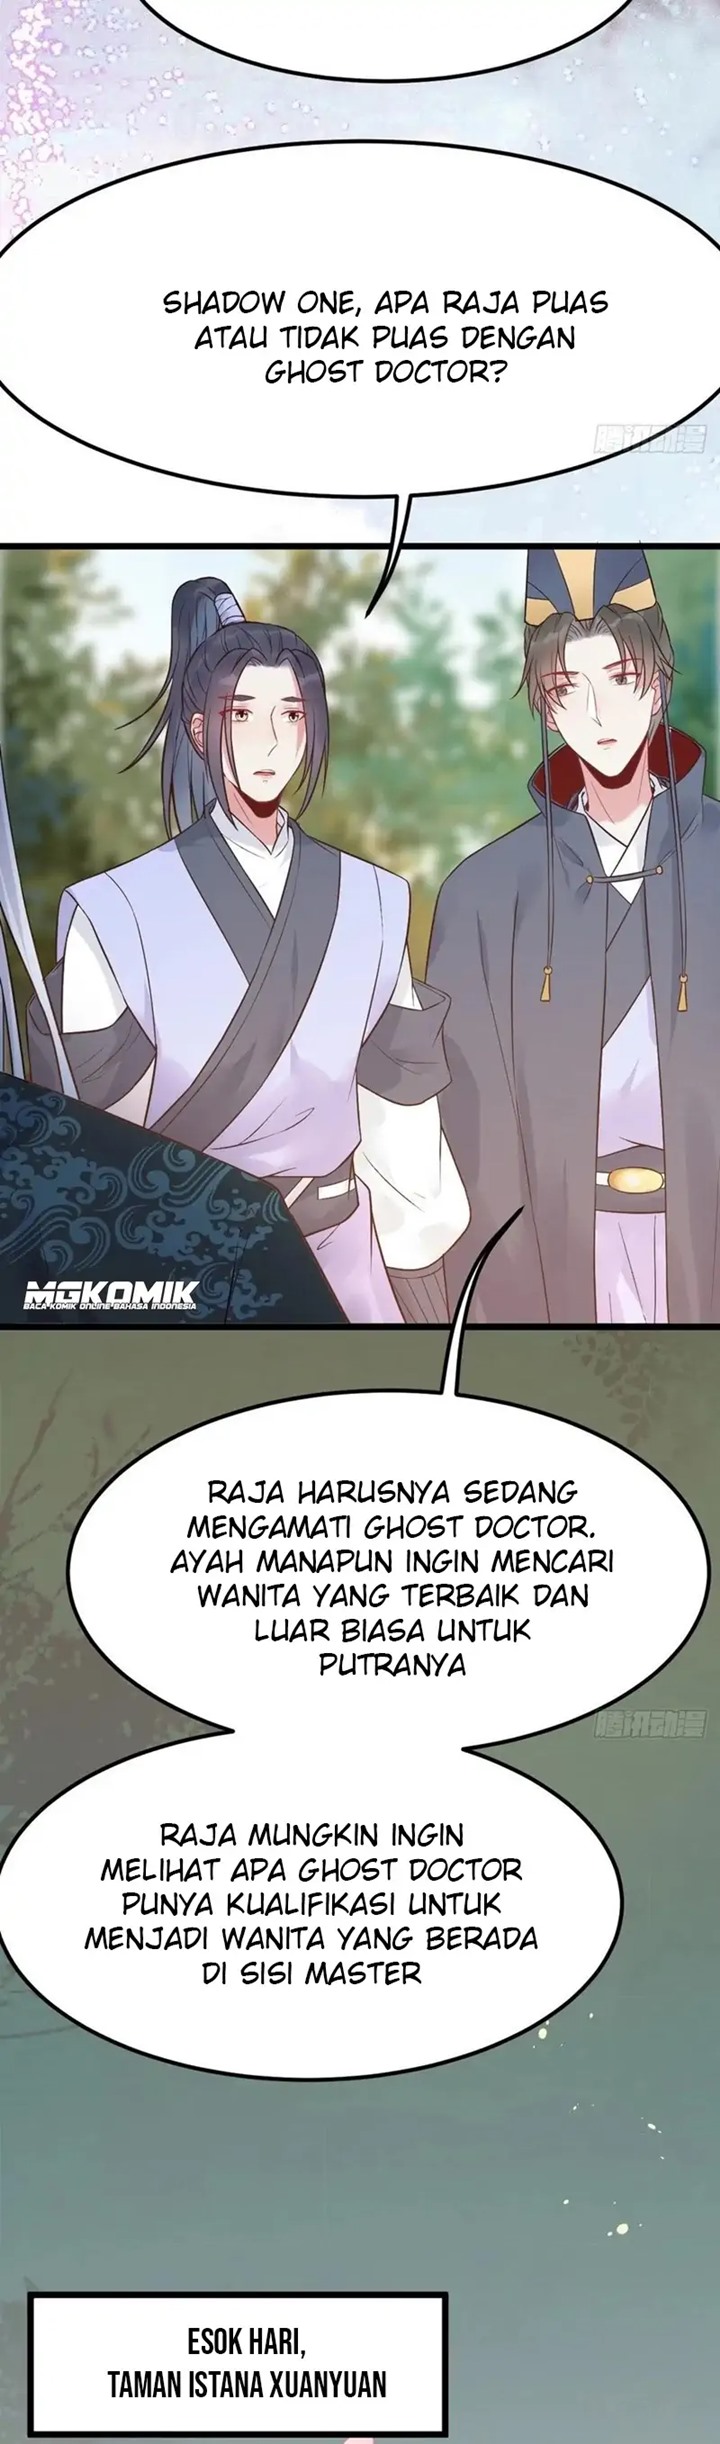 The Ghostly Doctor Chapter 455 19